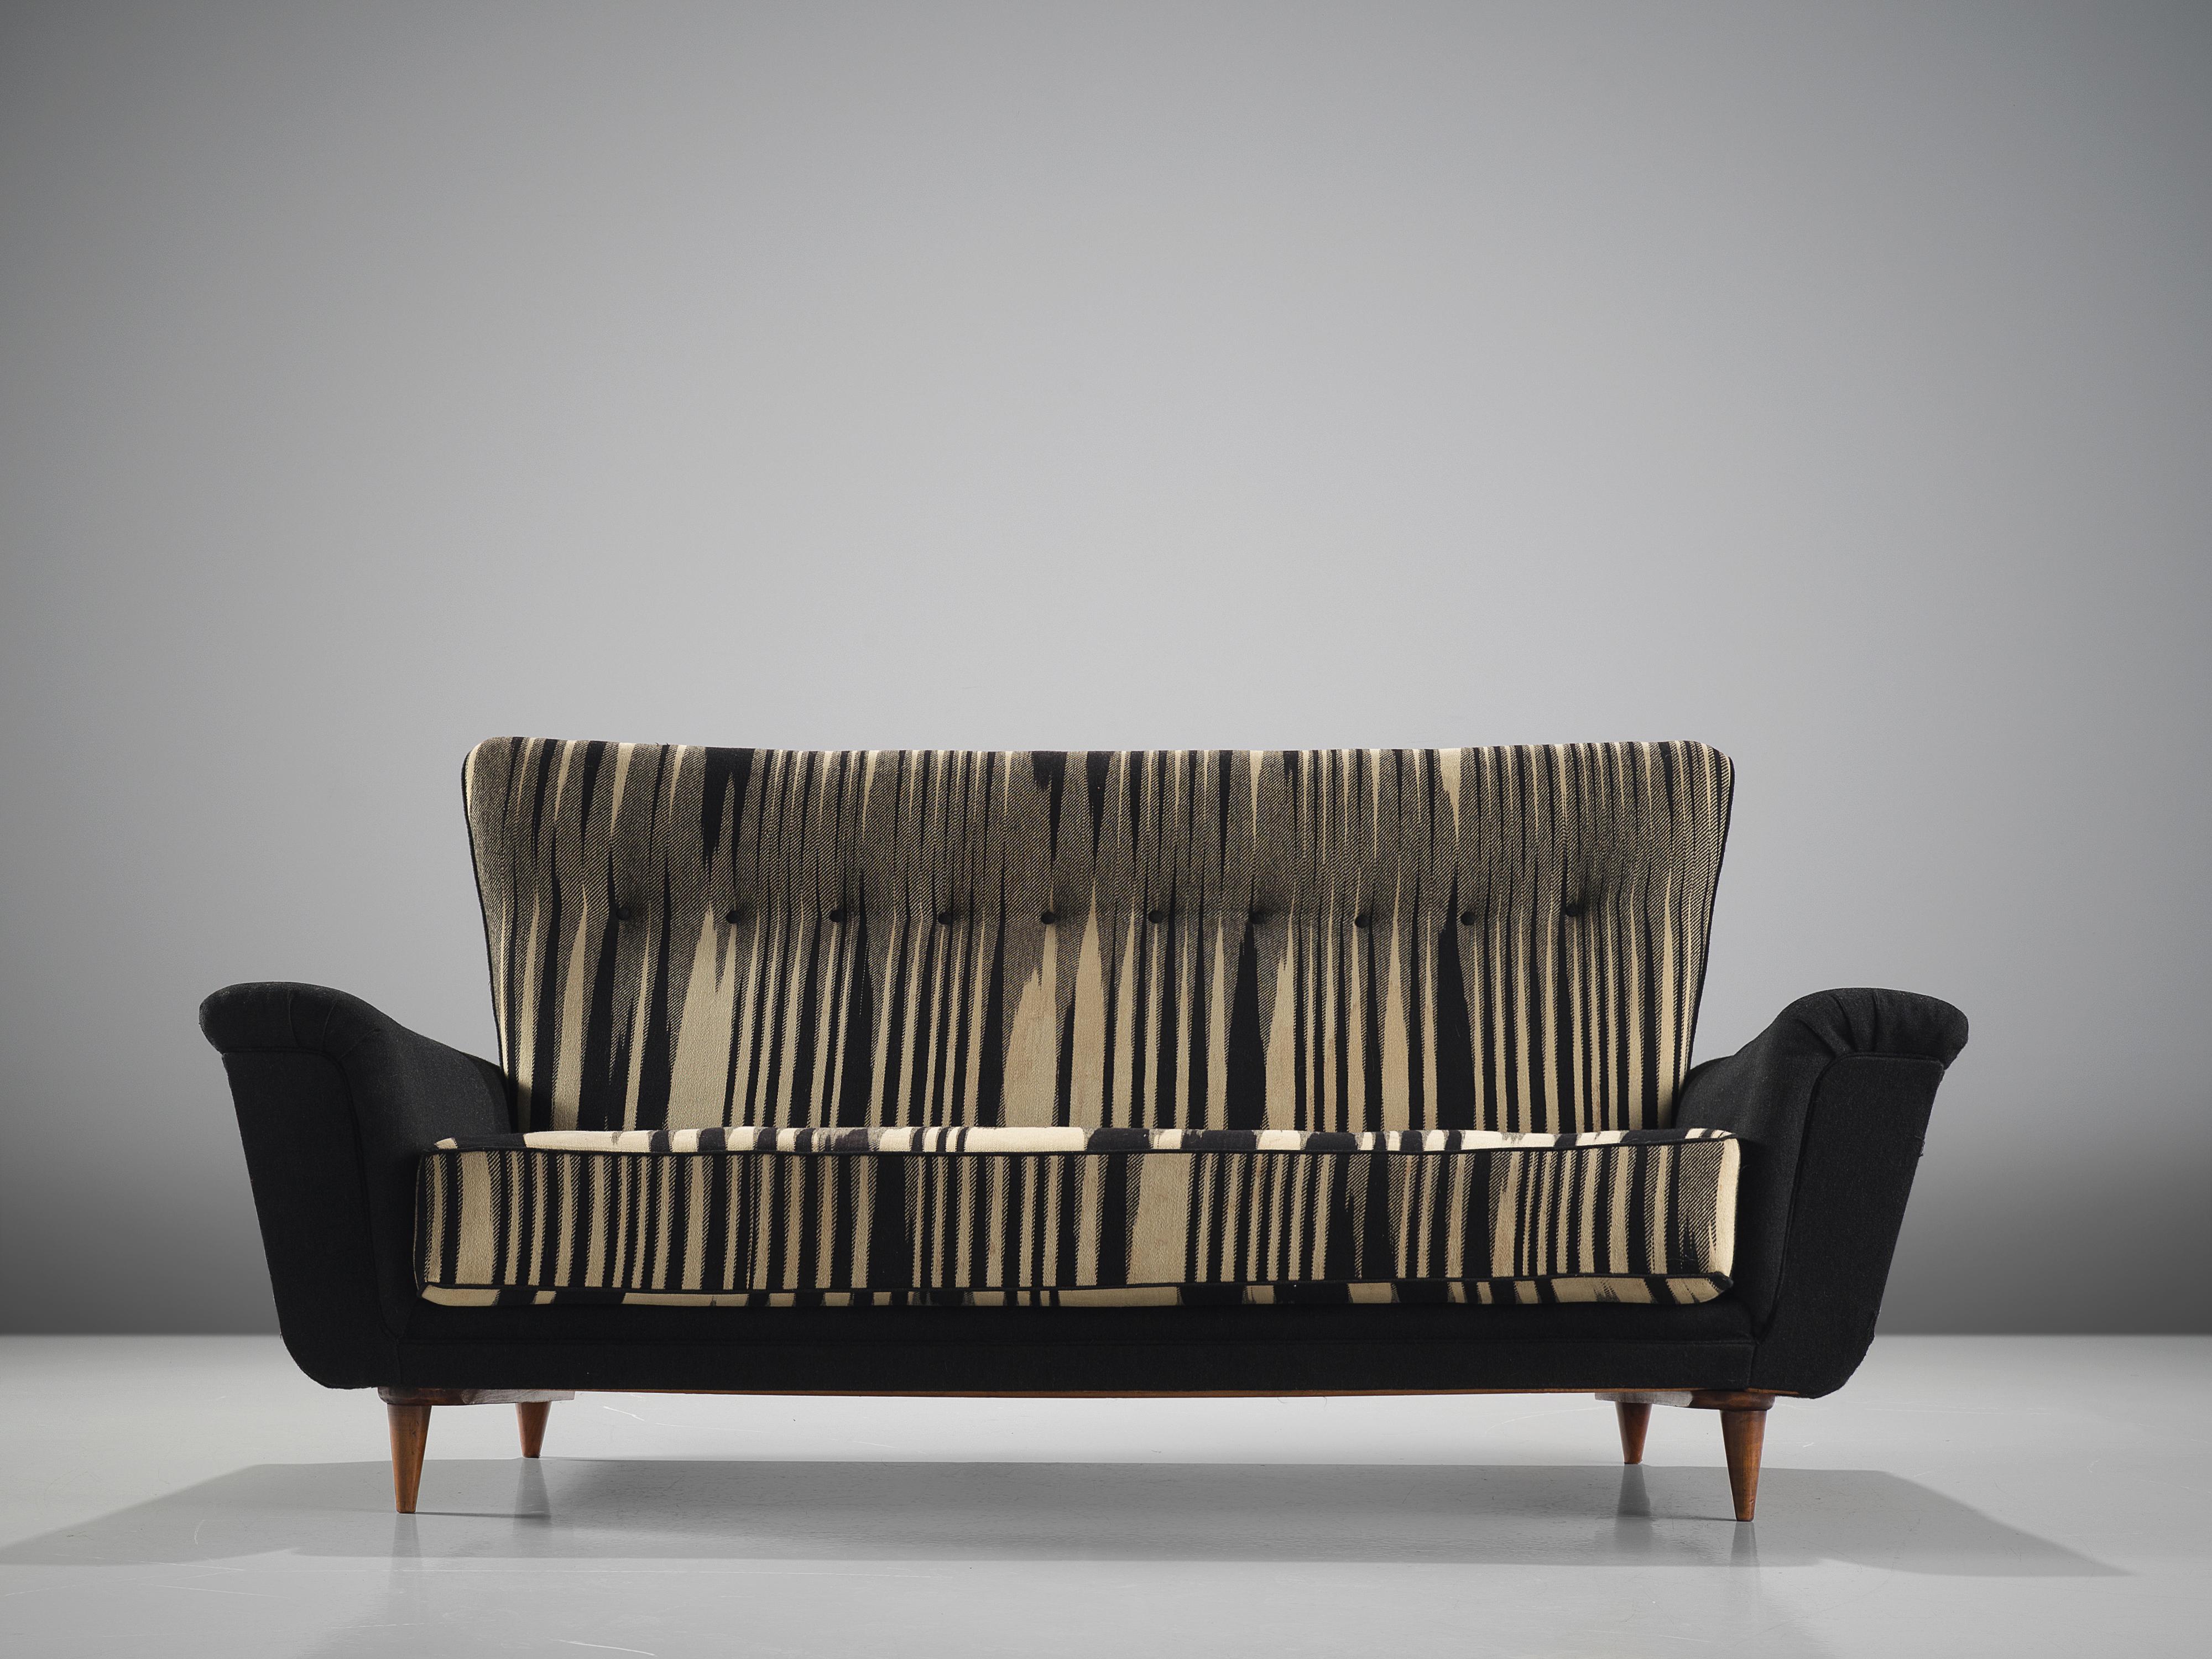 Theo Ruth for Artifort, sofa, in original black and white fabric, wood, The Netherlands, 1950s.

This sofa is an iconic example of an Artifort sofa designed by Theo Ruth in the 1950s. The sofa is on the one hand simplistic, with elegant, subtle